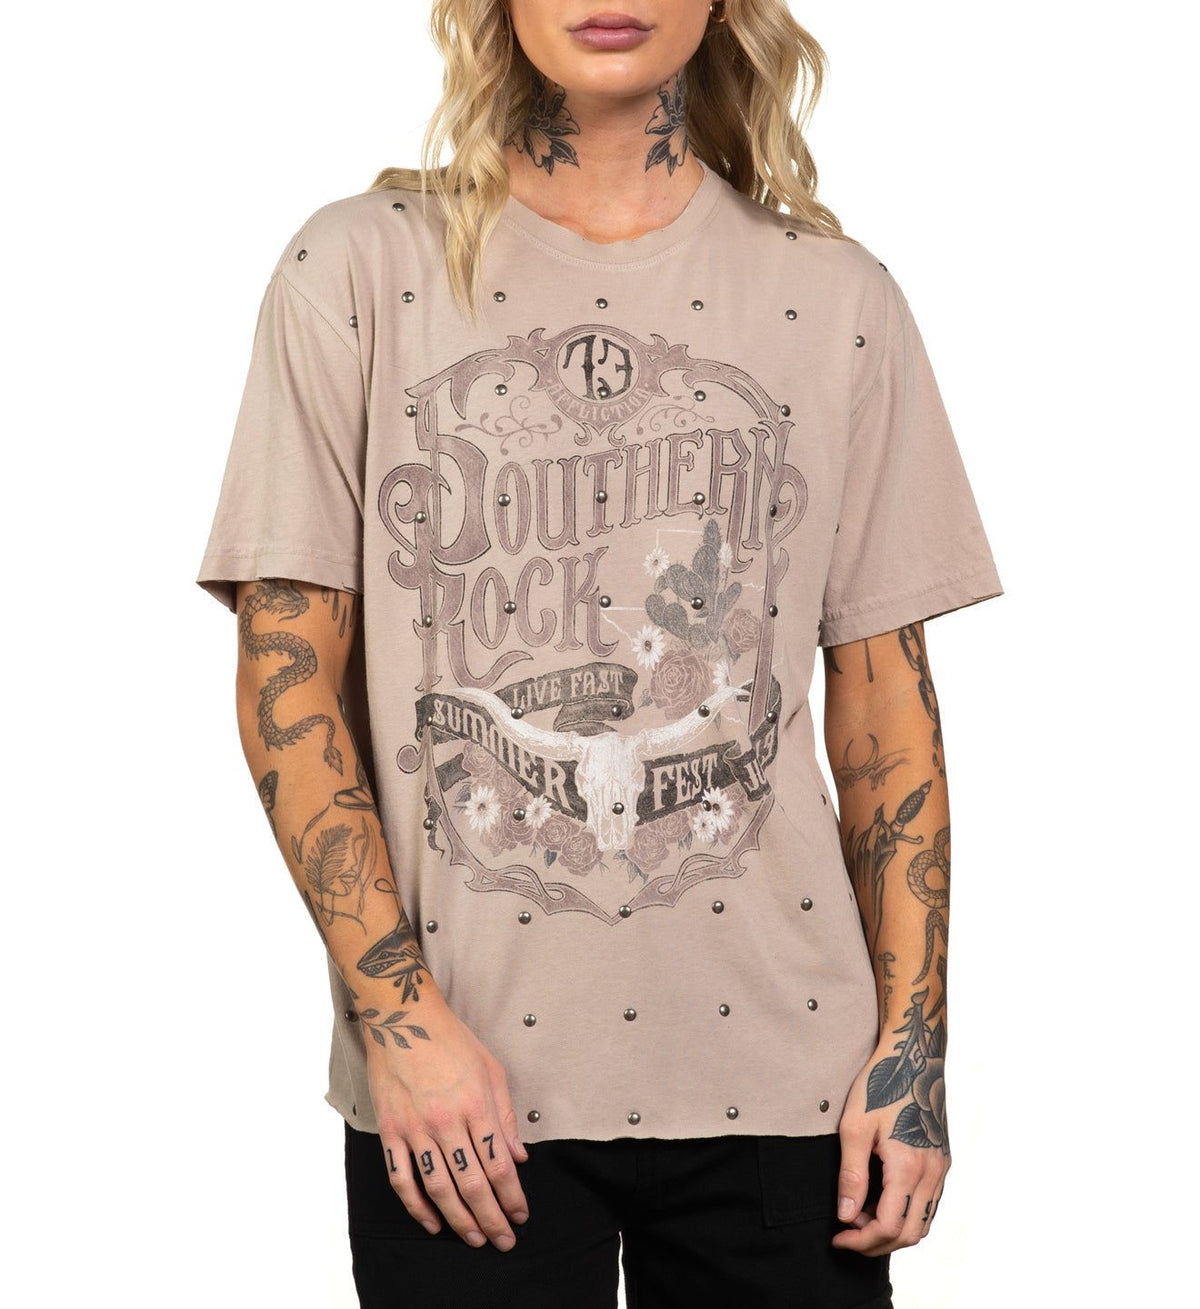 Southern Rock - Affliction Clothing